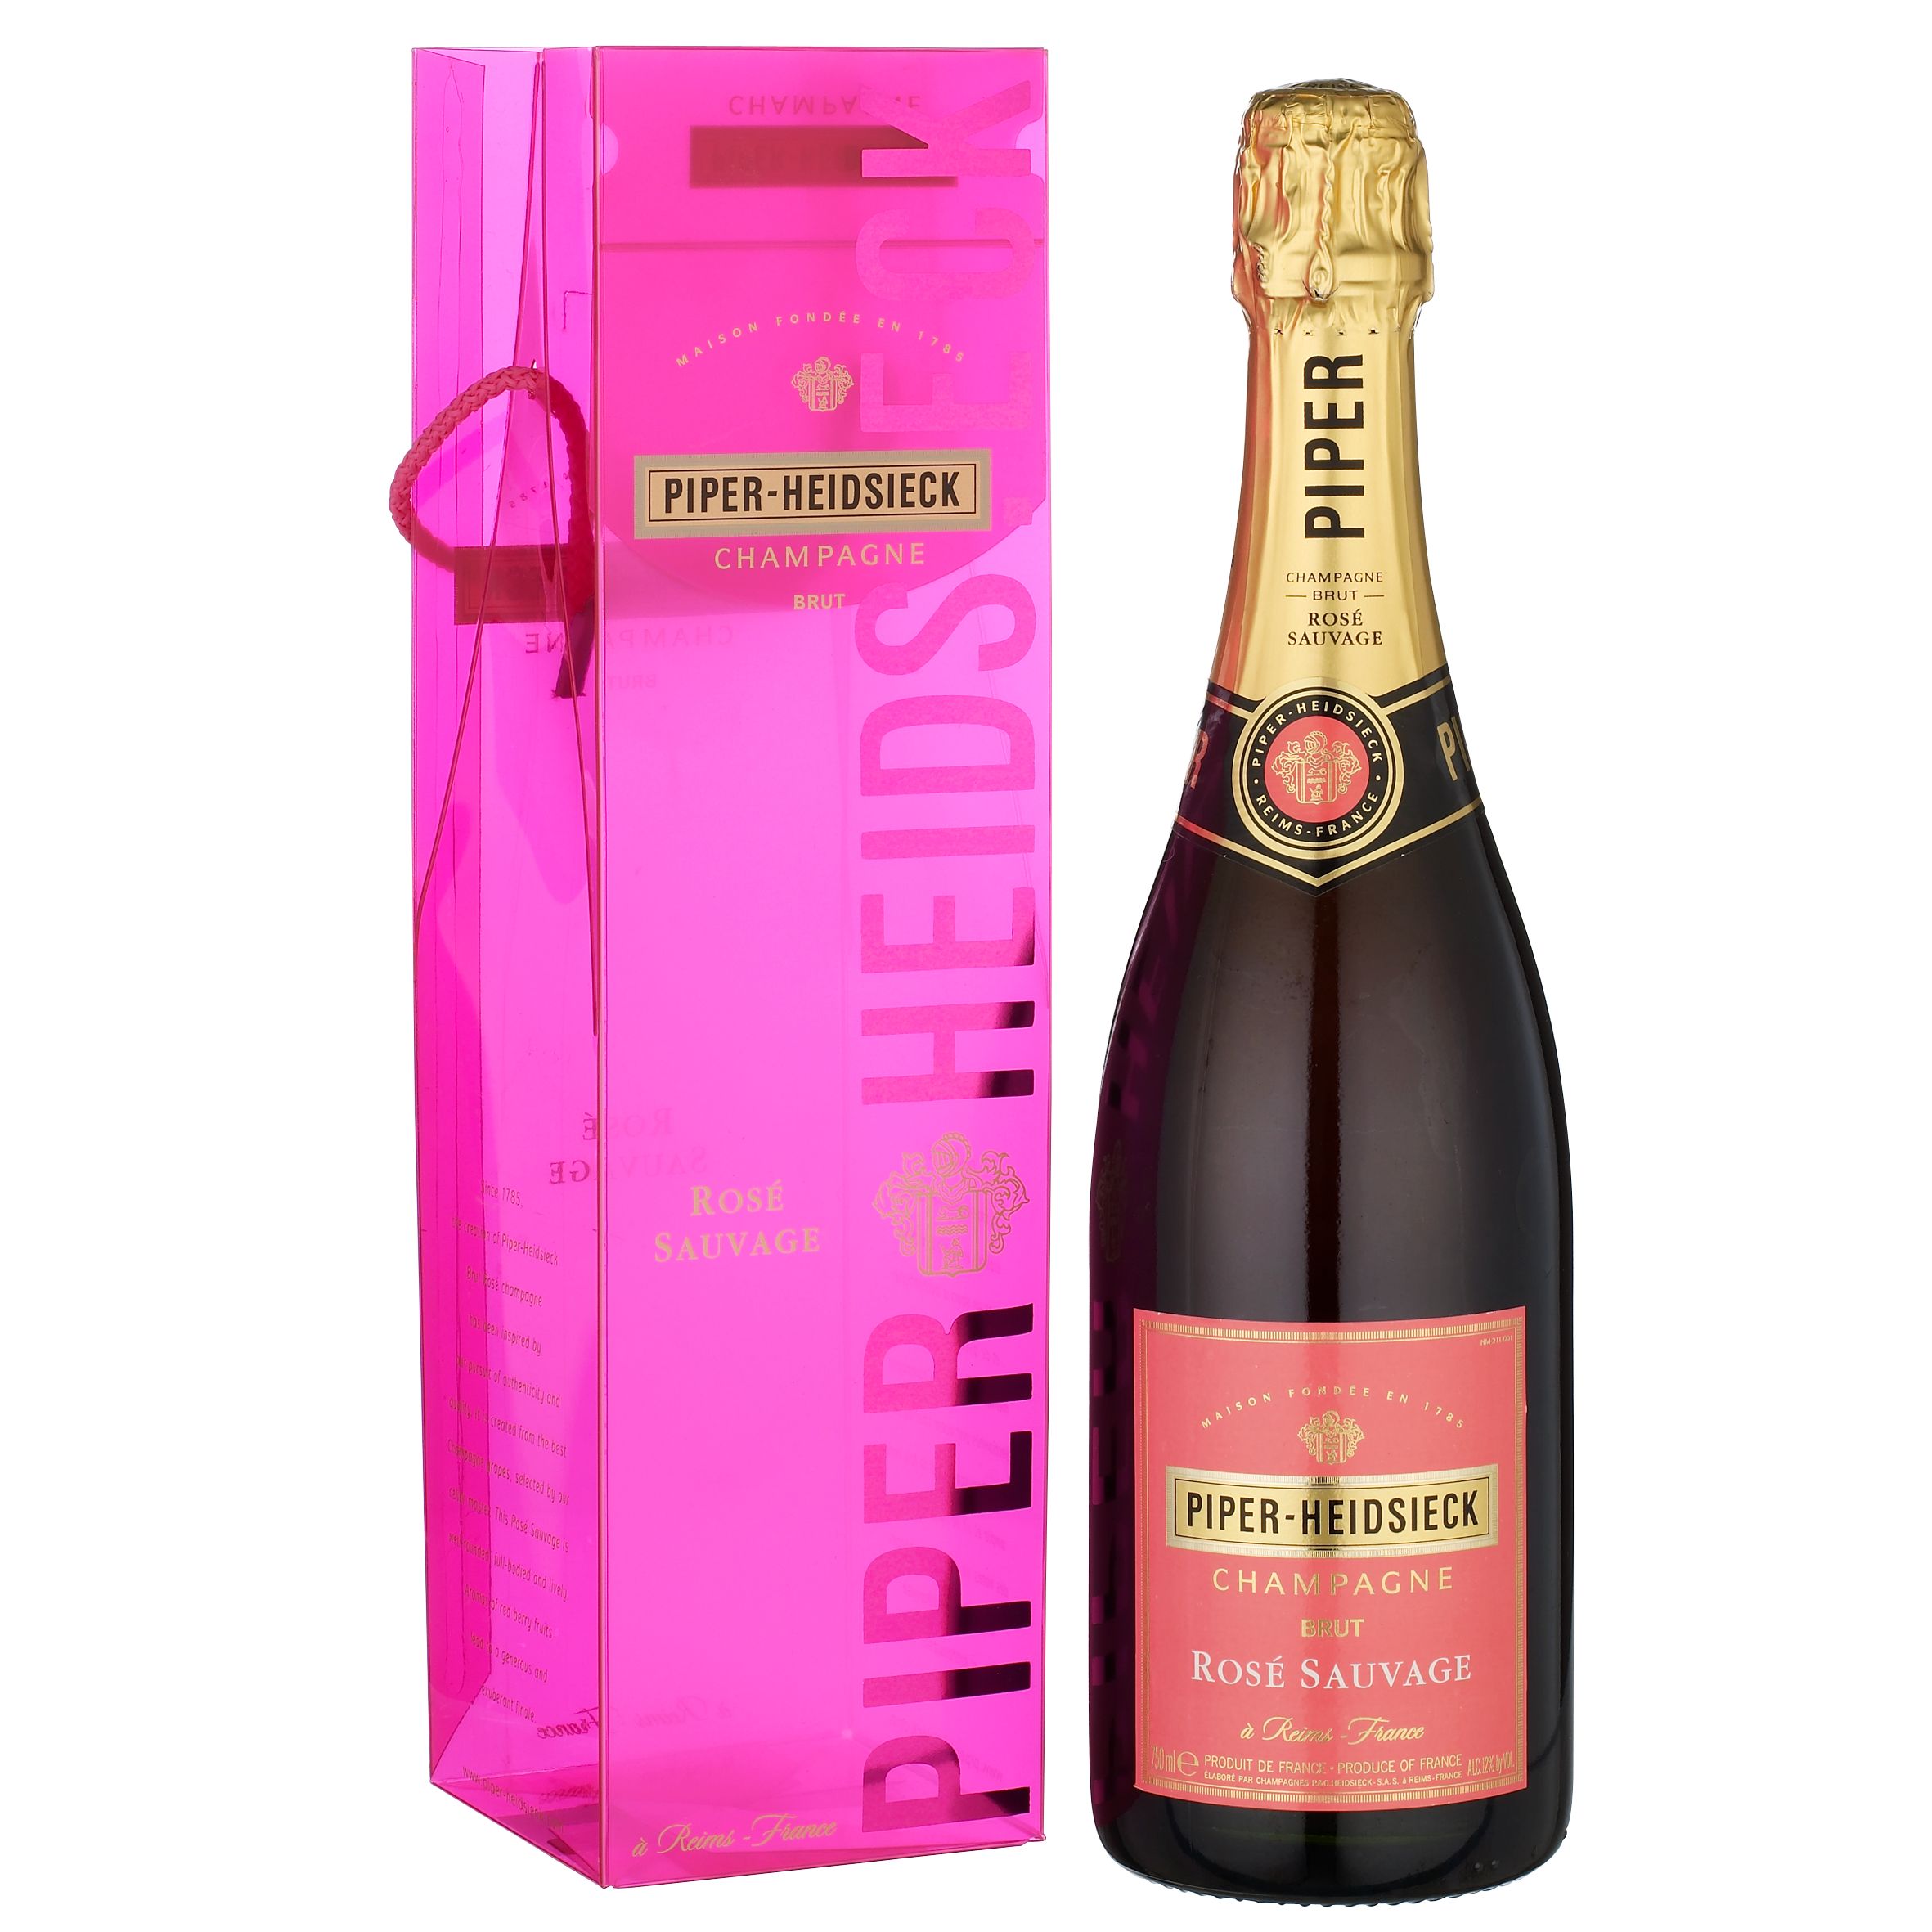 Piper Heidsieck Rosé Sauvage NV Champagne, France at JohnLewis